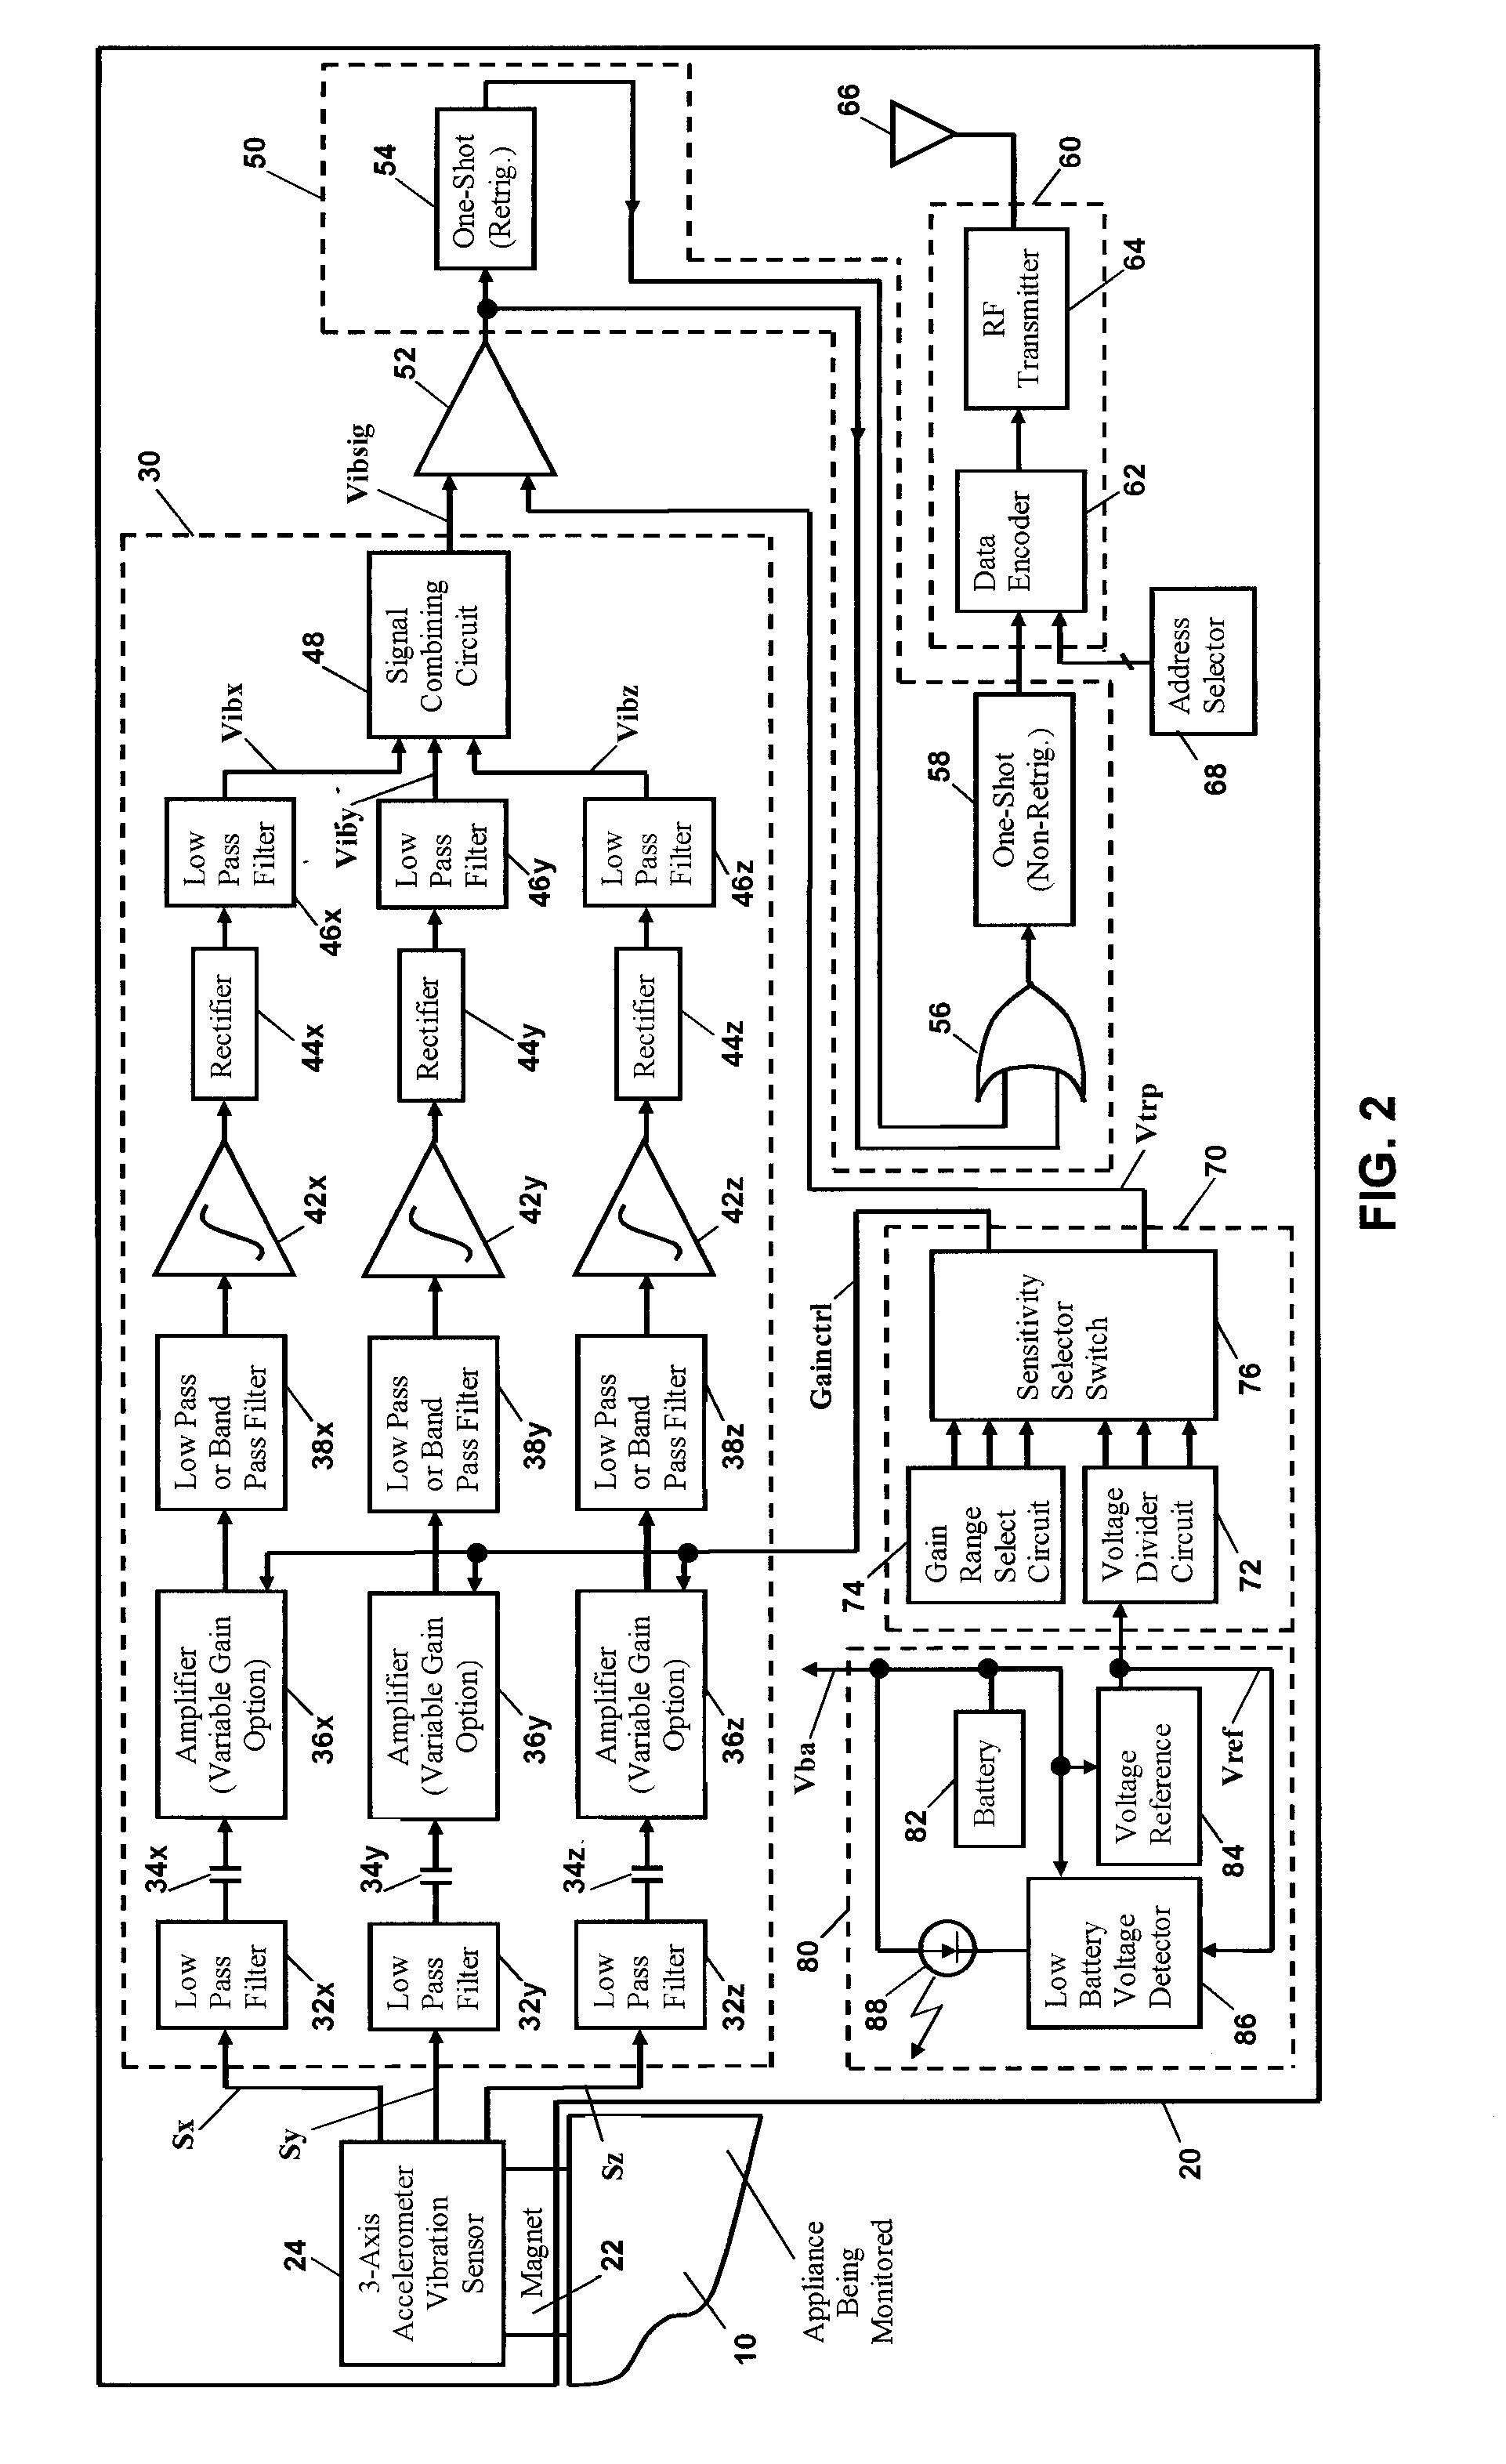 Machine or device monitoring and alert method and system